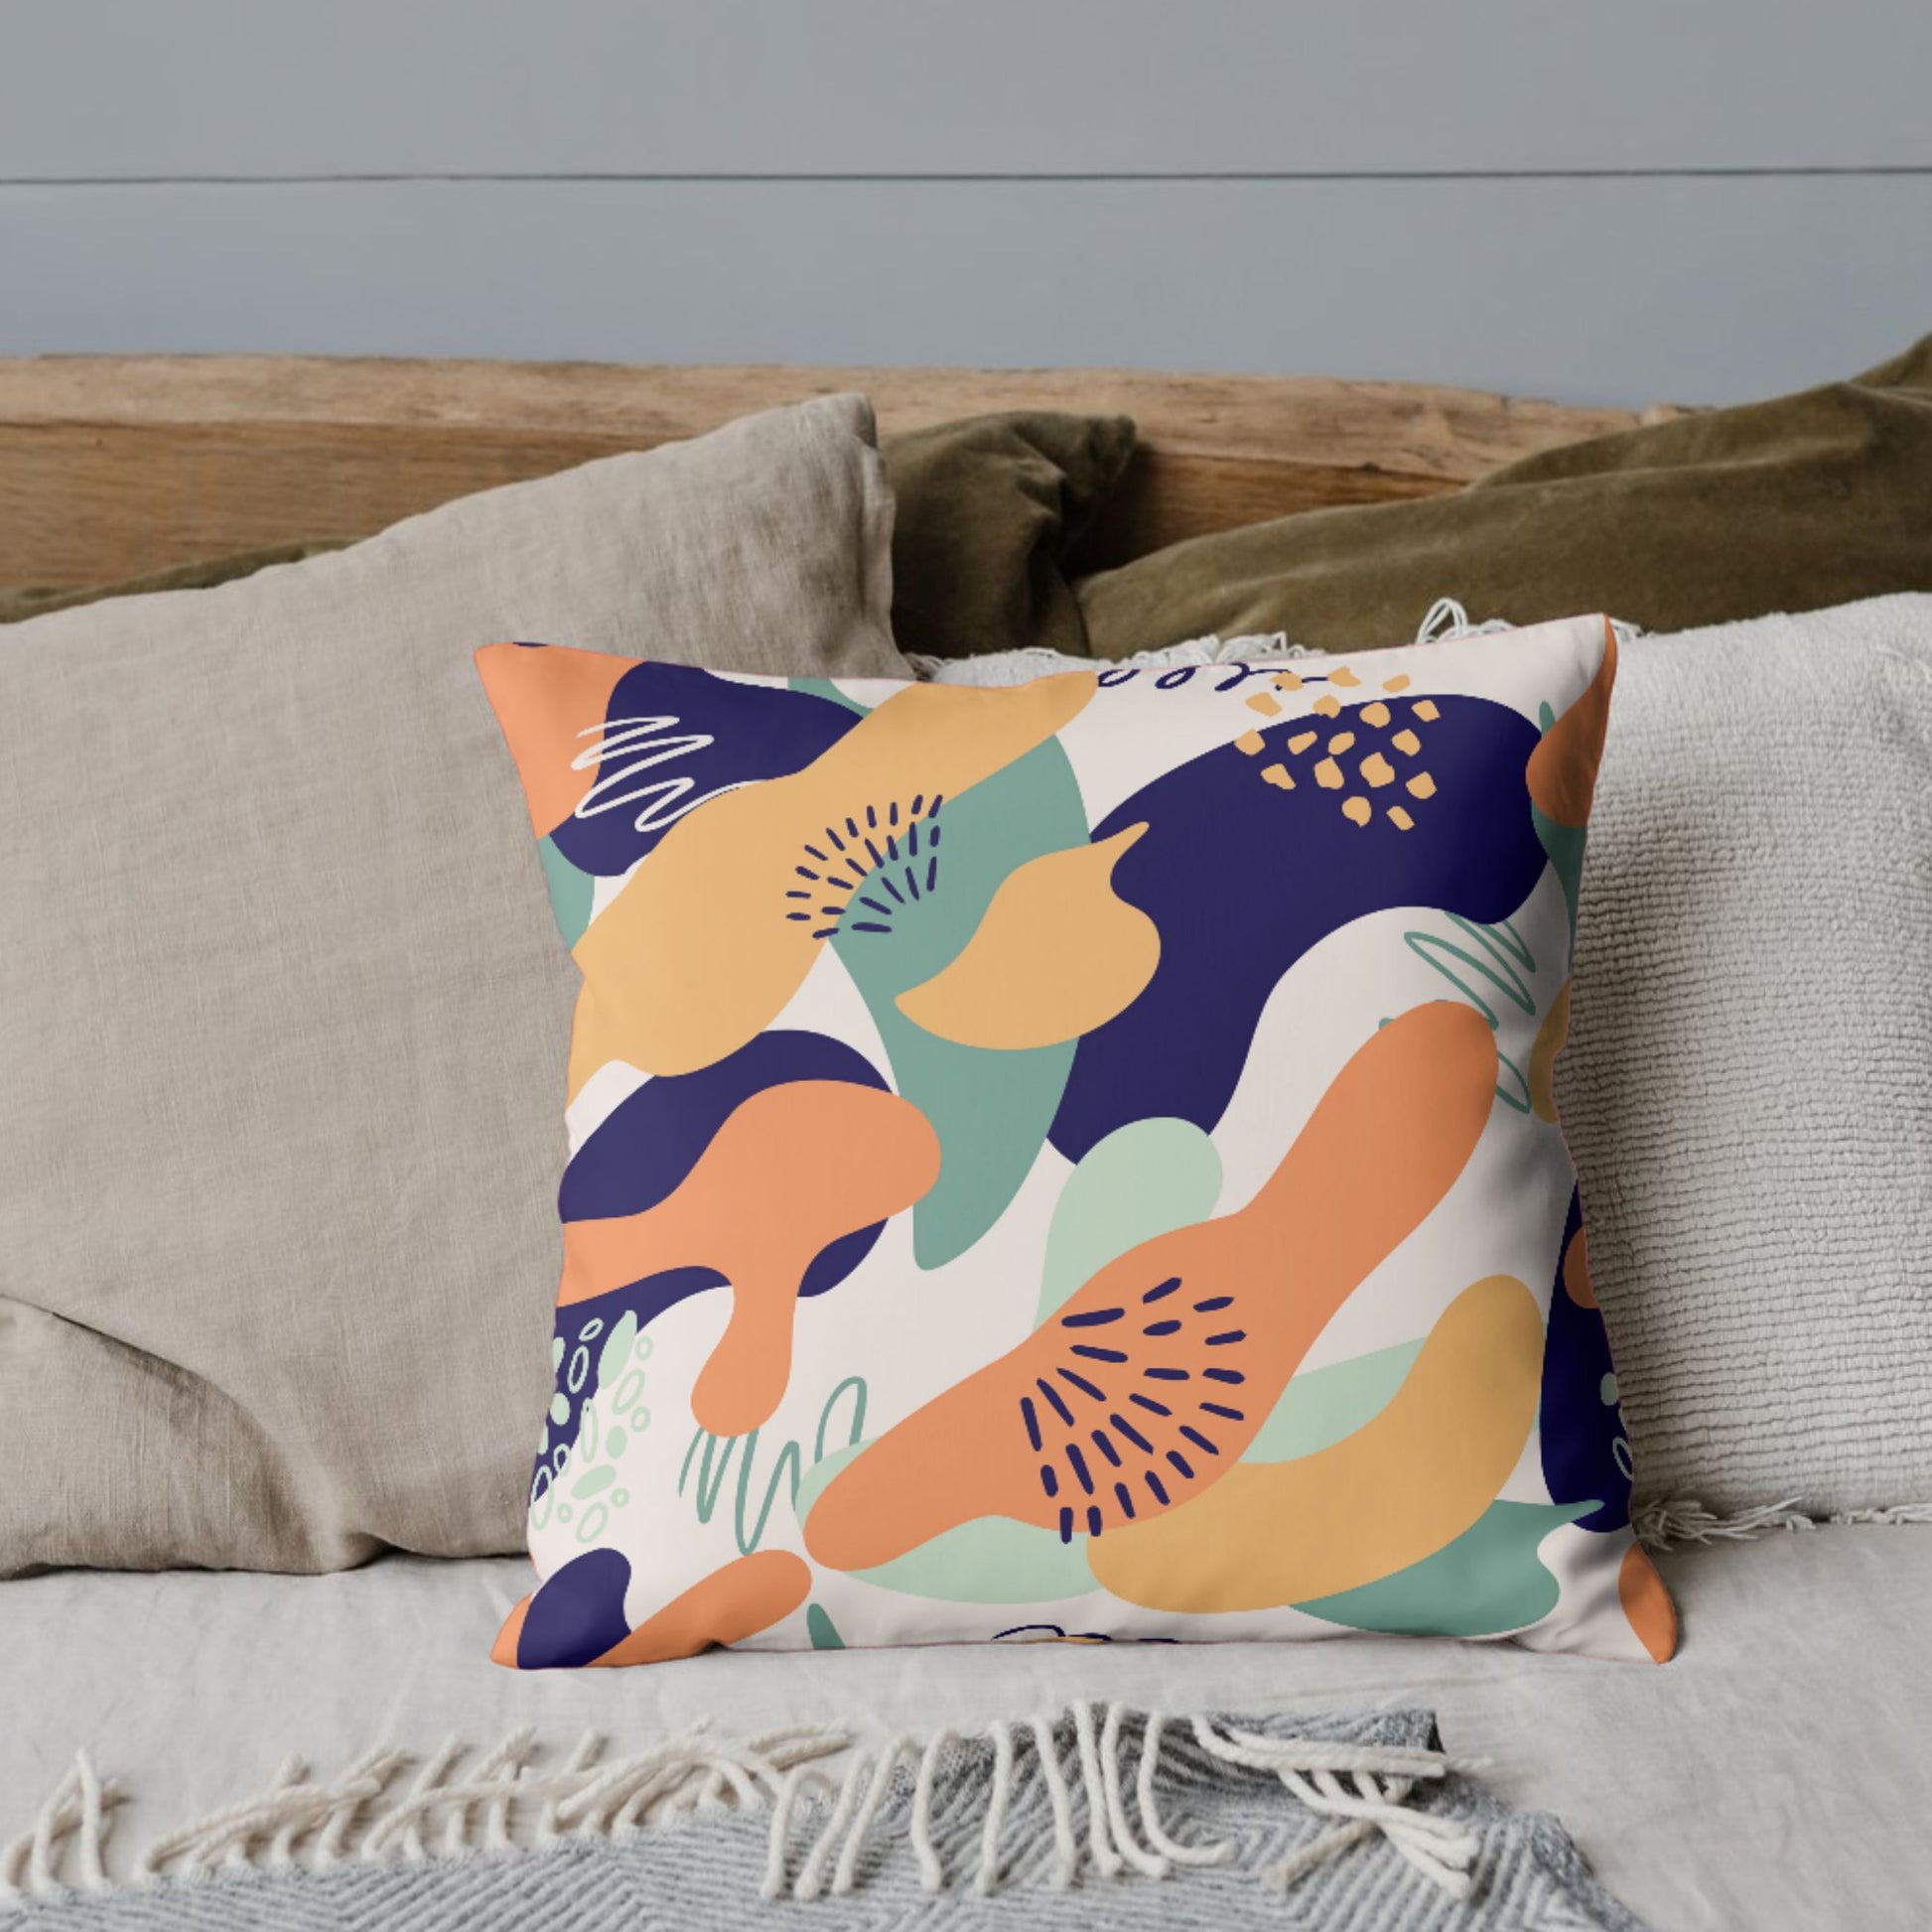 A square pillow showcasing a colorful abstract pattern with organic shapes in orange, navy, green, and cream, giving a playful and artistic vibe.